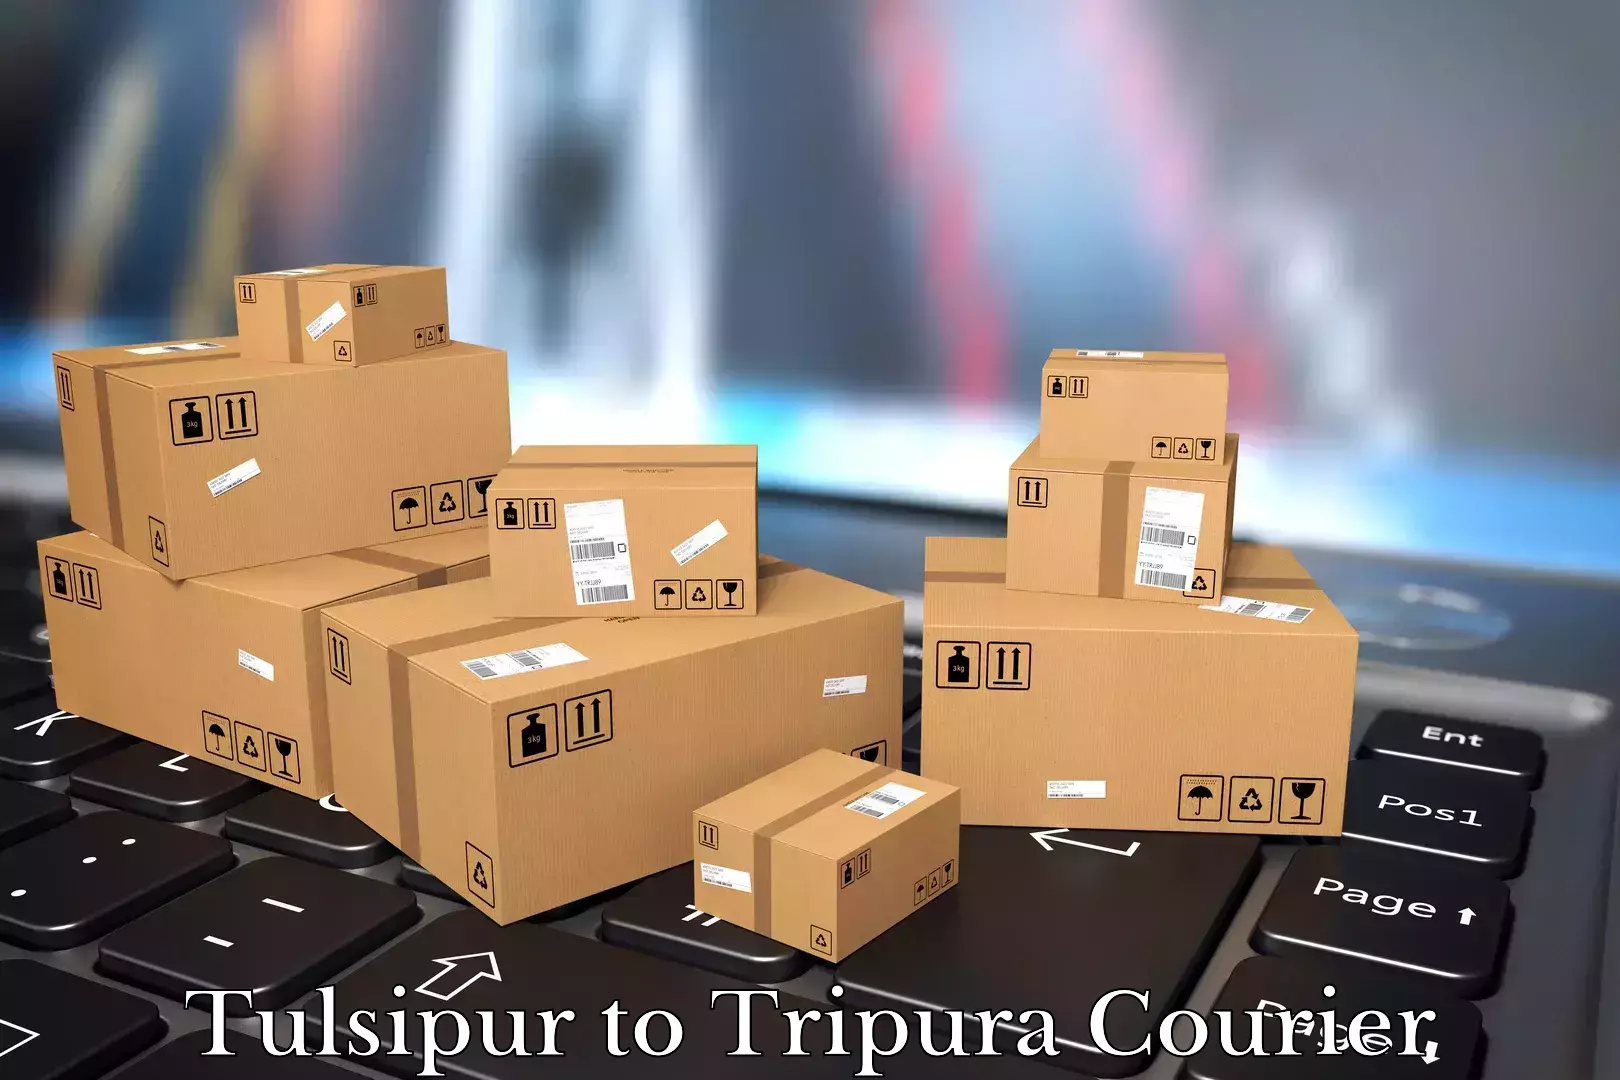 Efficient moving company Tulsipur to Udaipur Tripura